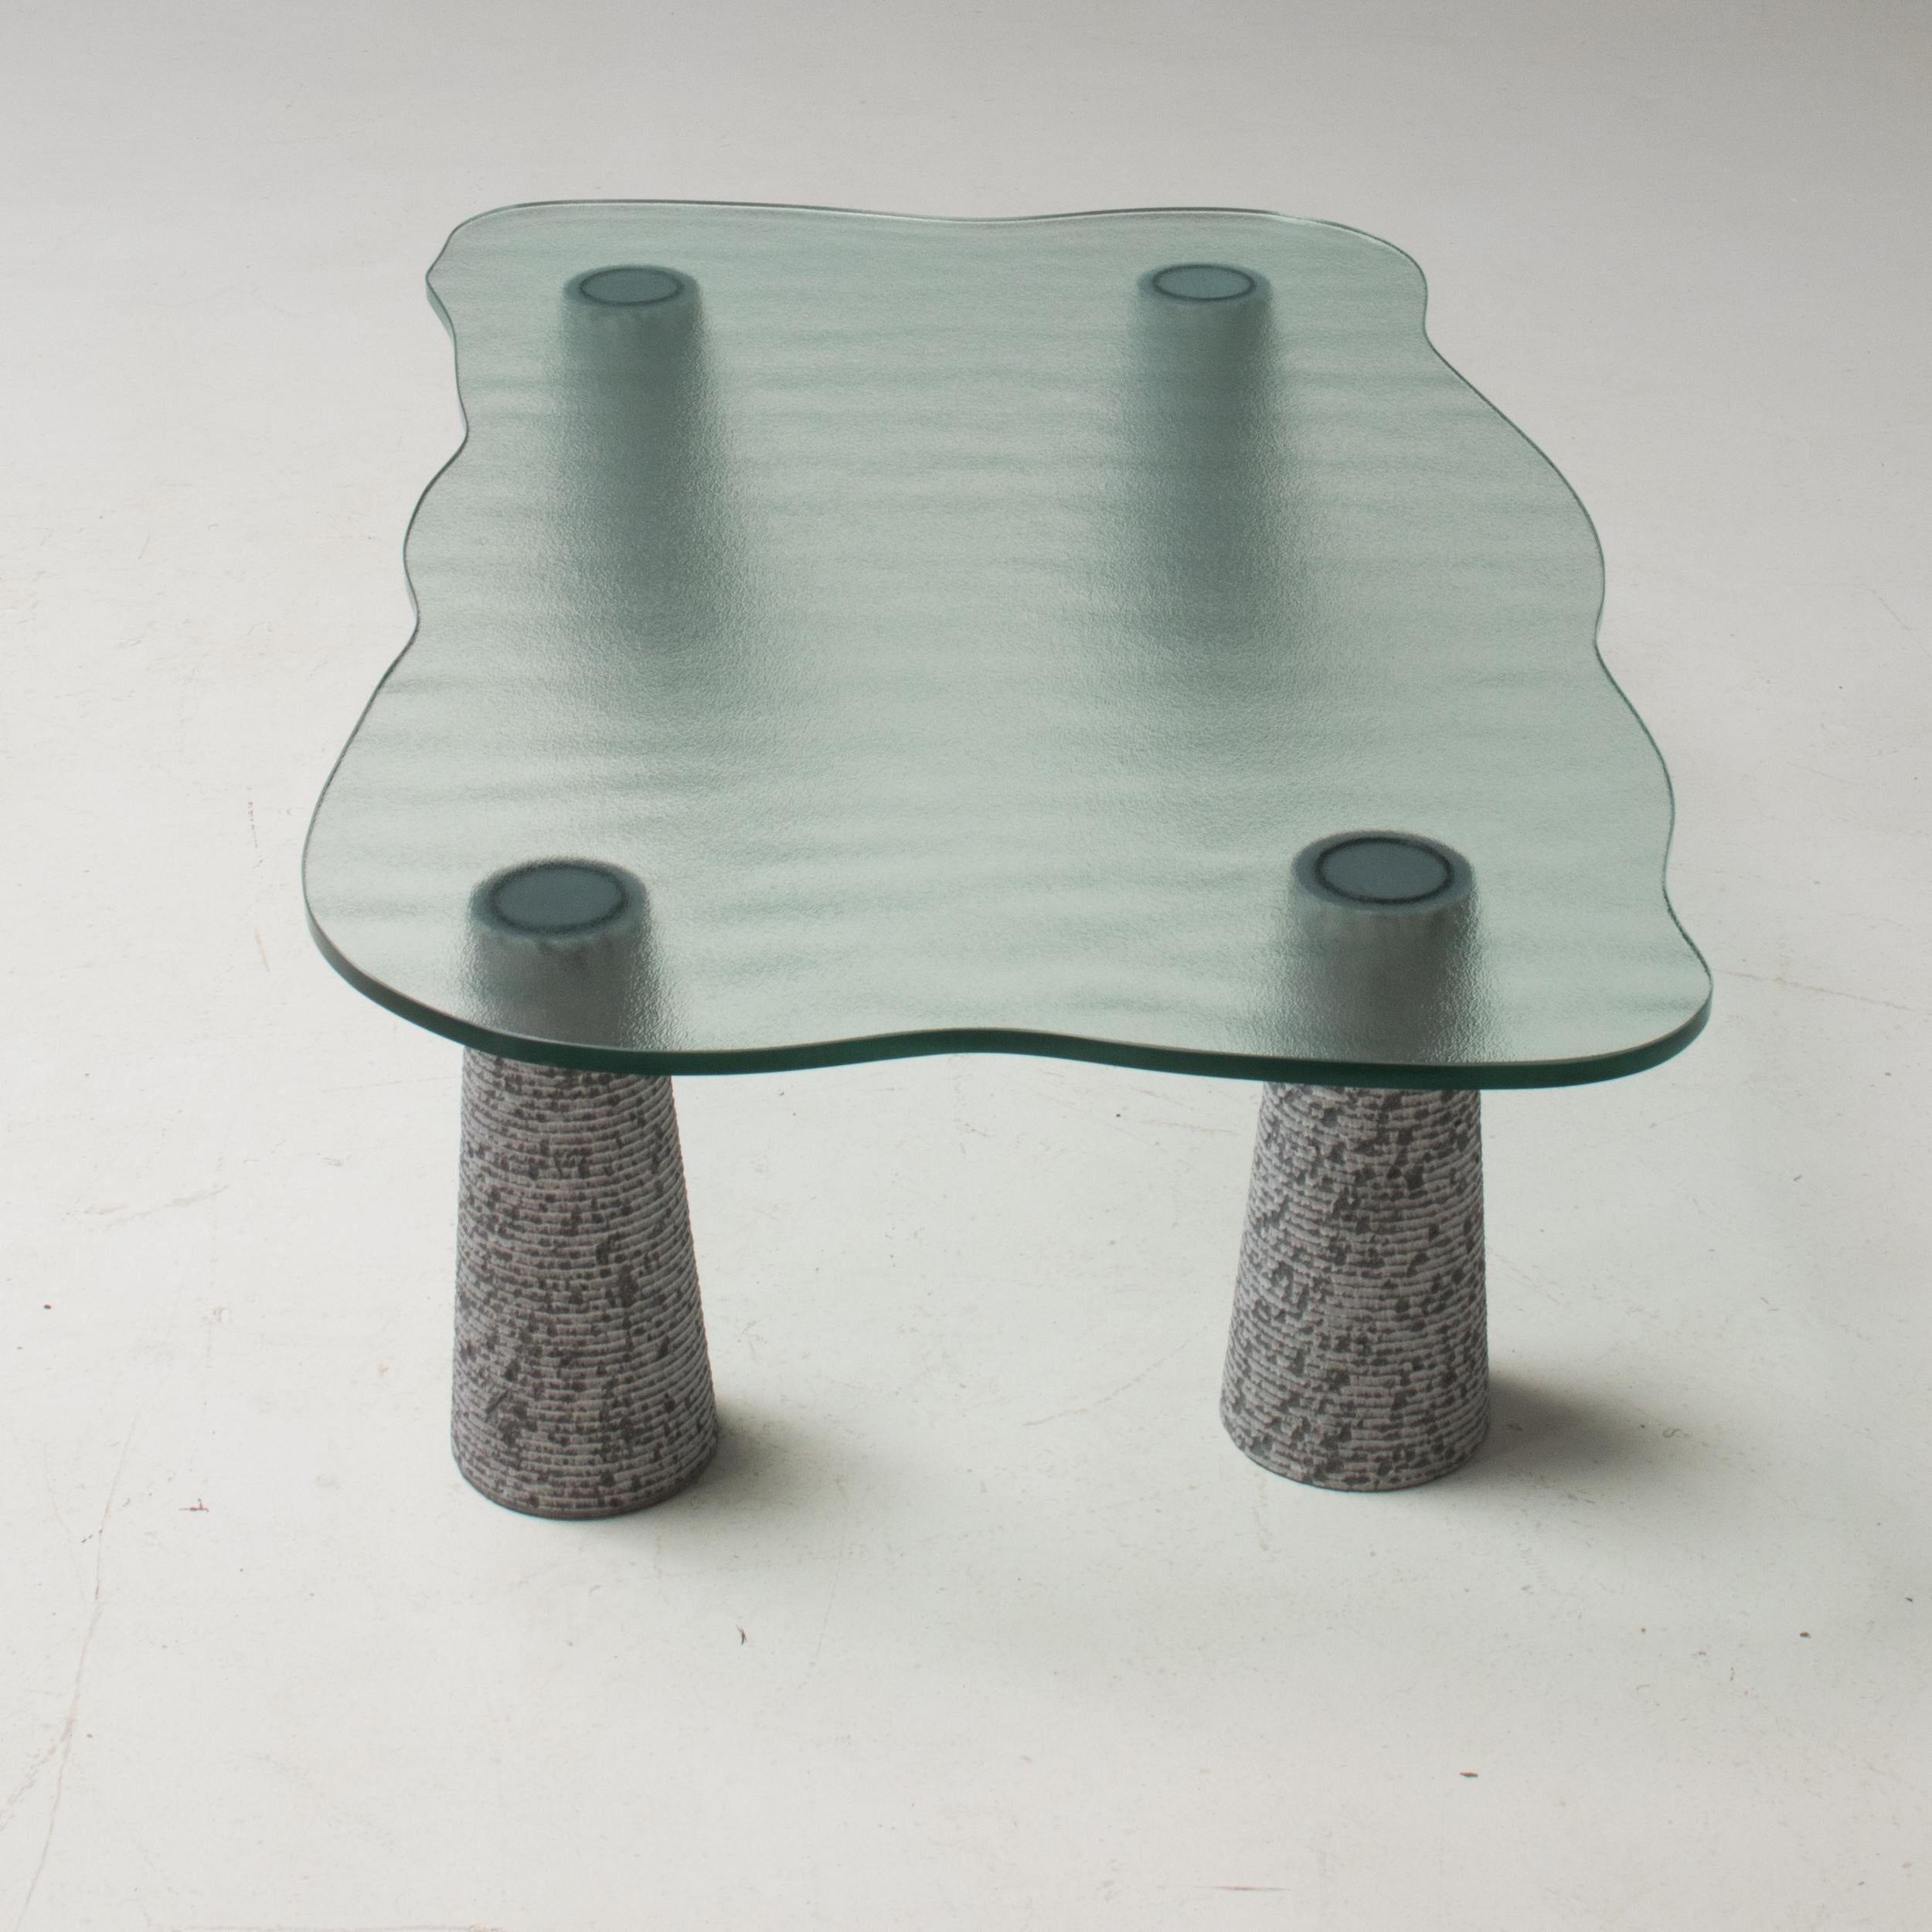 A fantastic example of postmodern Italian design, this Casigliani coffee table was produced in the 1980s.

The coffee table features four individual conical shaped legs sculpted from grey marble, each with a similar textured surface, which allows